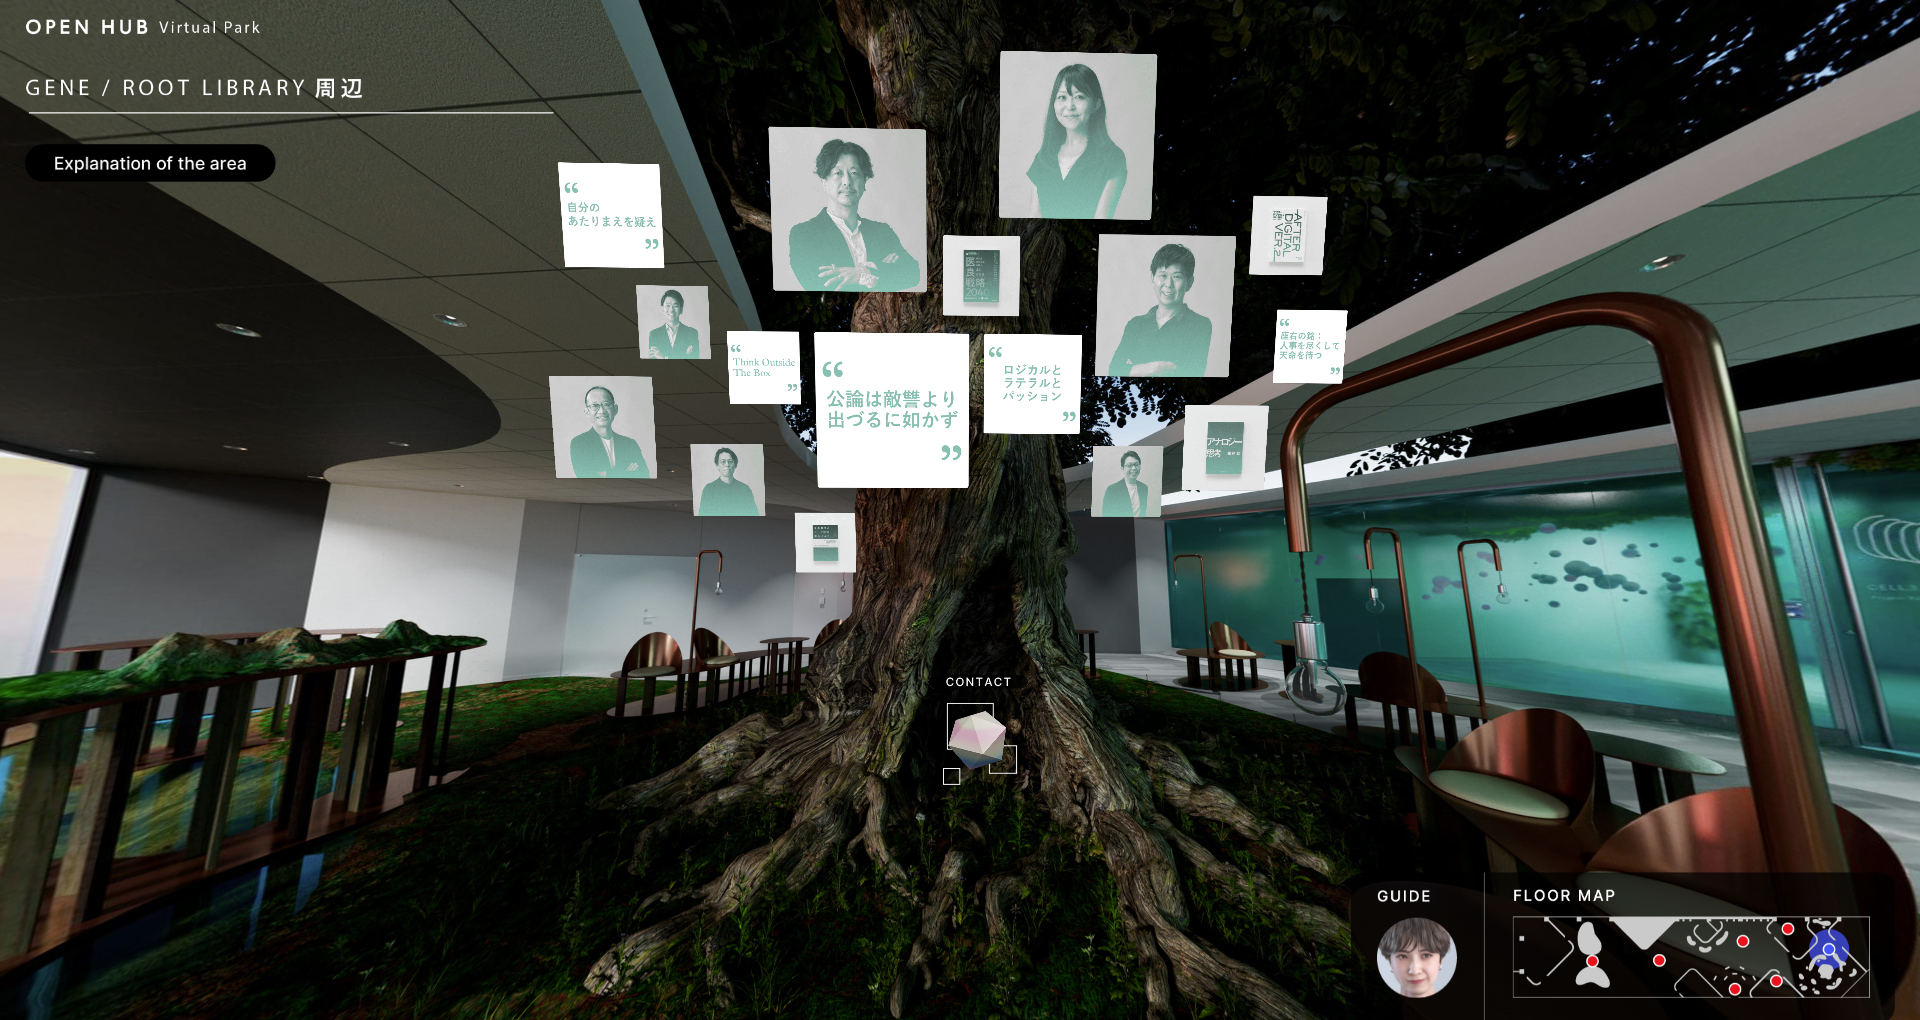 Room in the virtual park.